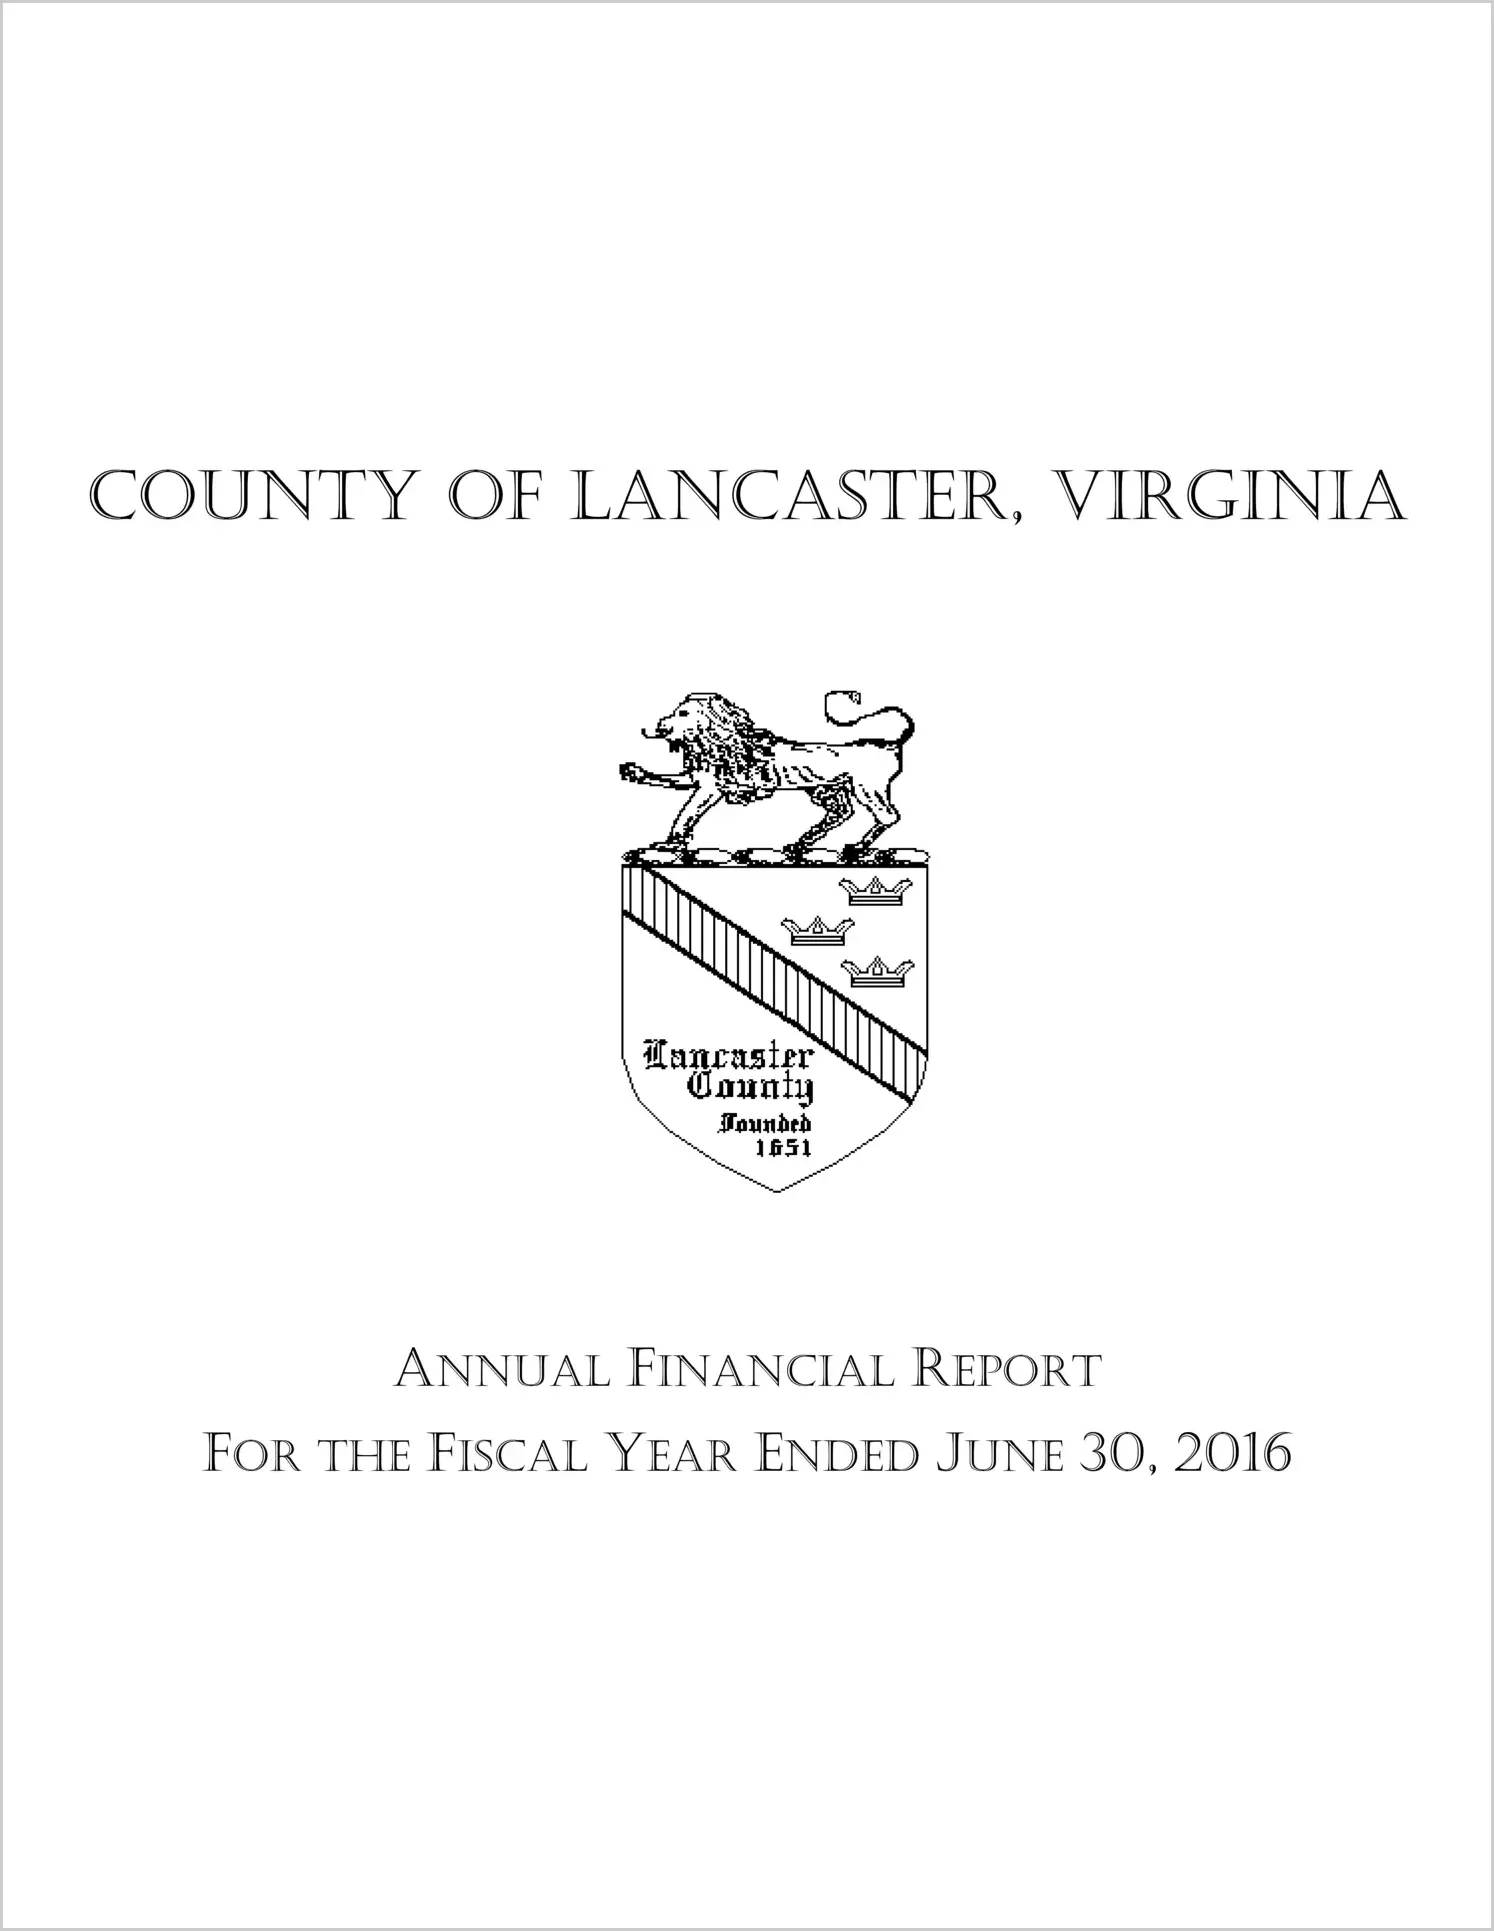 2016 Annual Financial Report for County of Lancaster